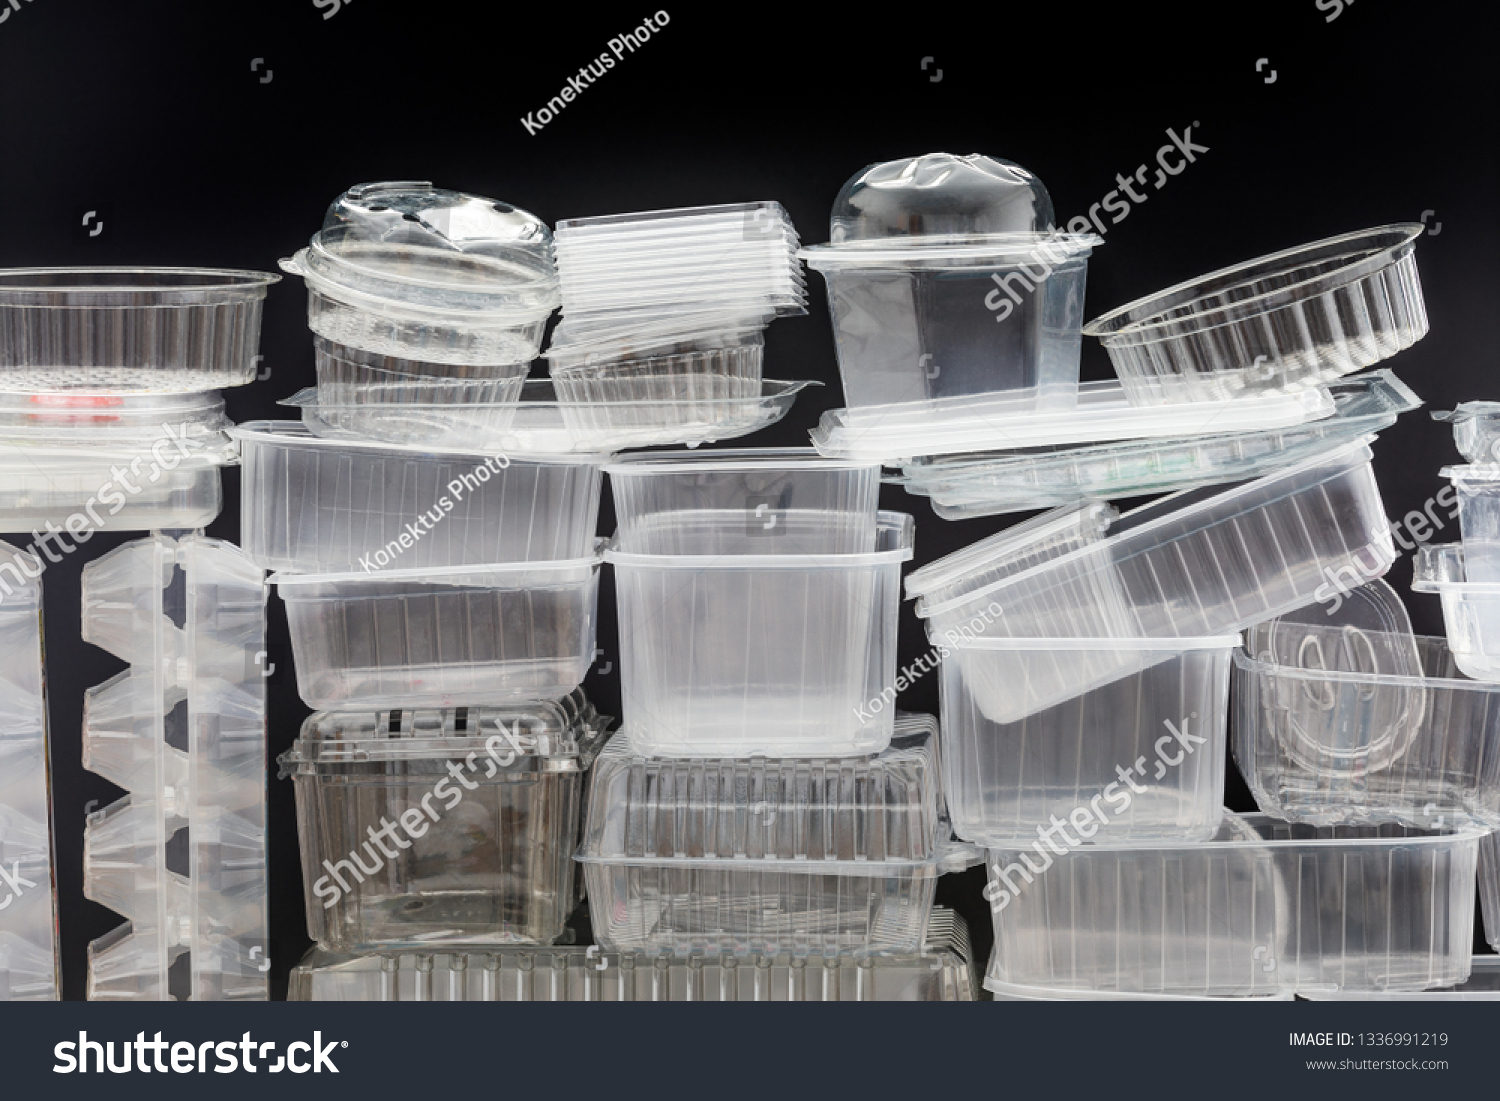 Many Clean Plastic Boxes Food Packaging Stock Photo 1336991219 |  Shutterstock